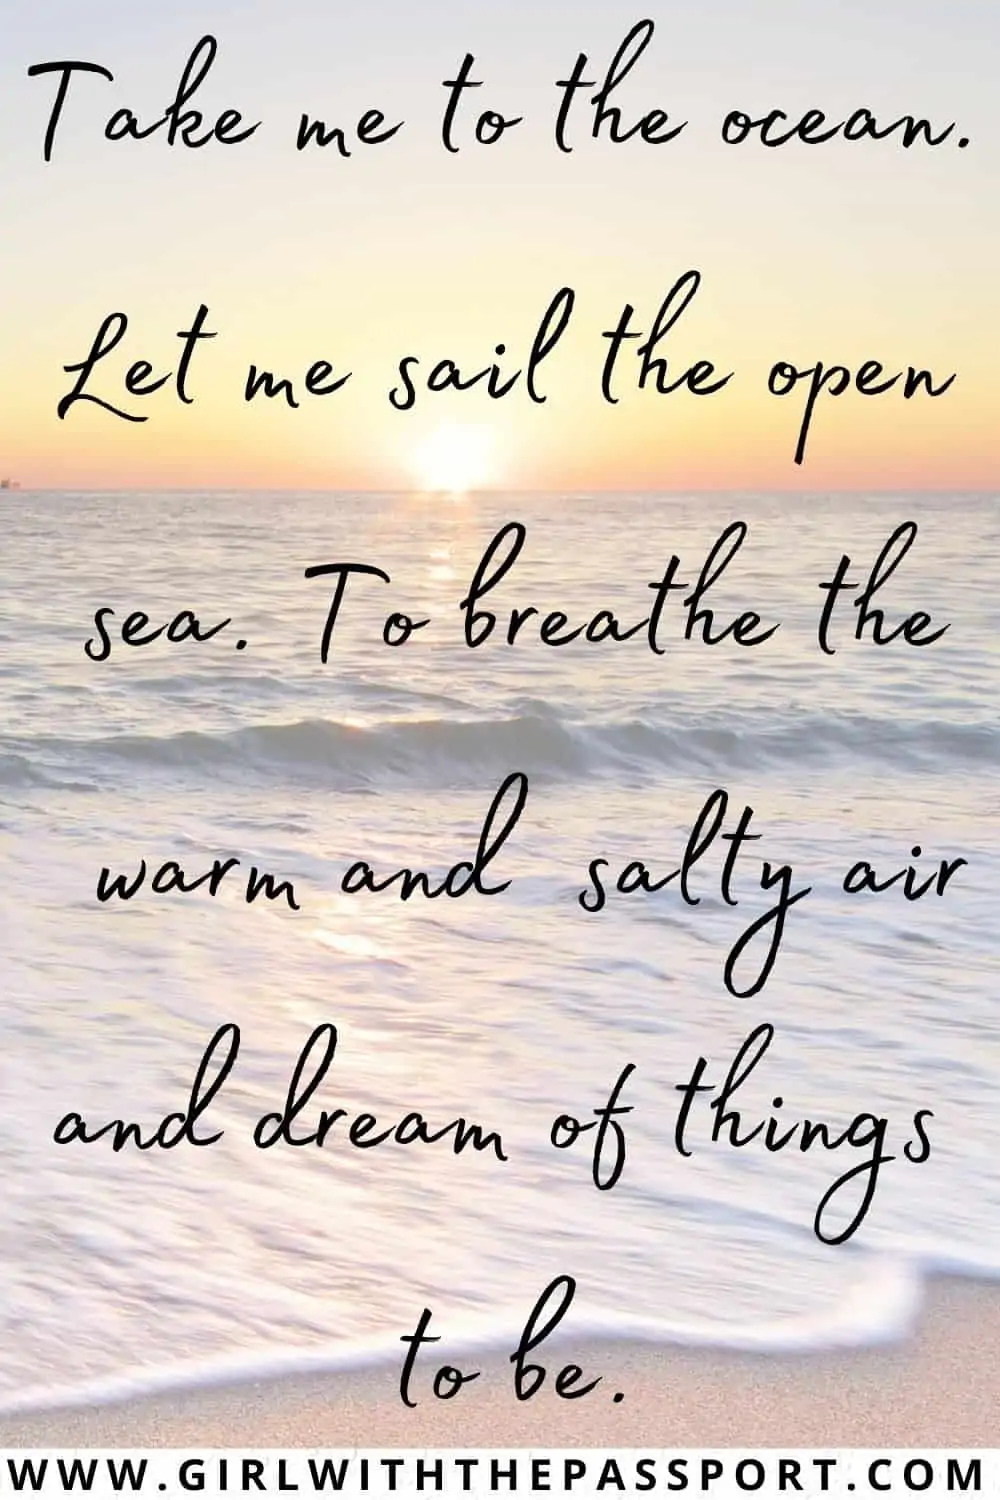 Best Sea Quotes and Long Quotes about the Sea